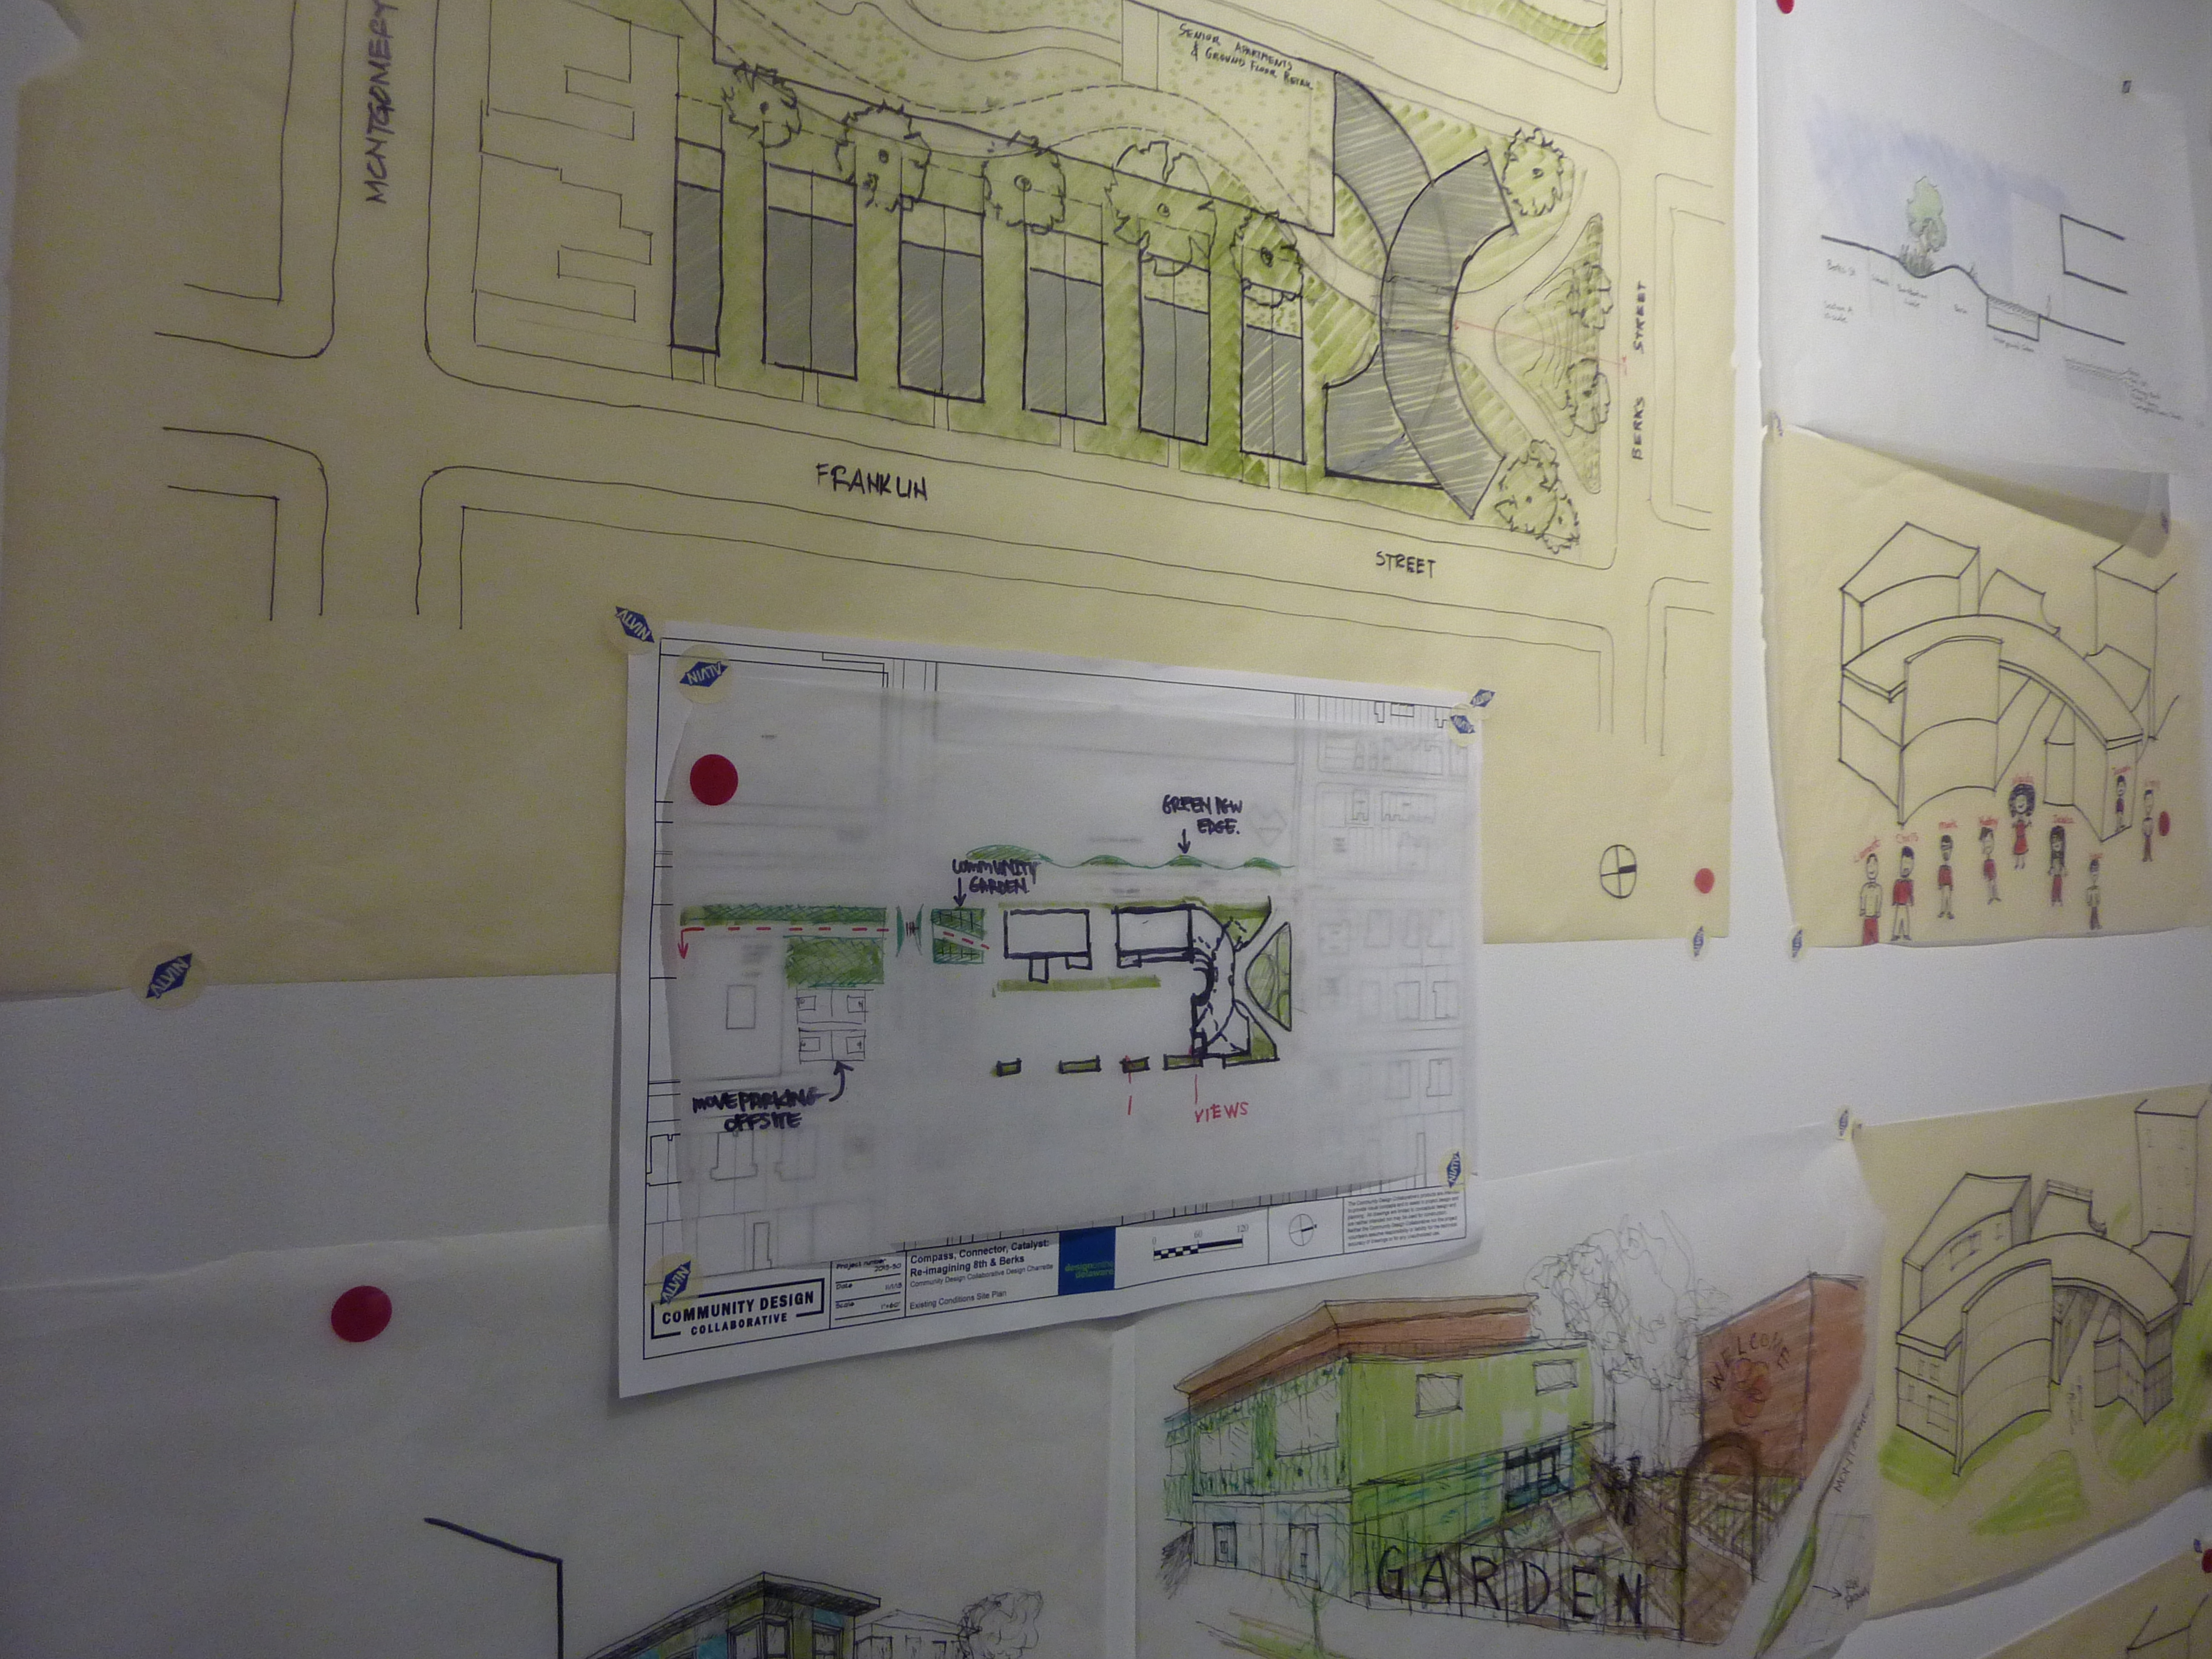 Sample designs for 8th and Berks